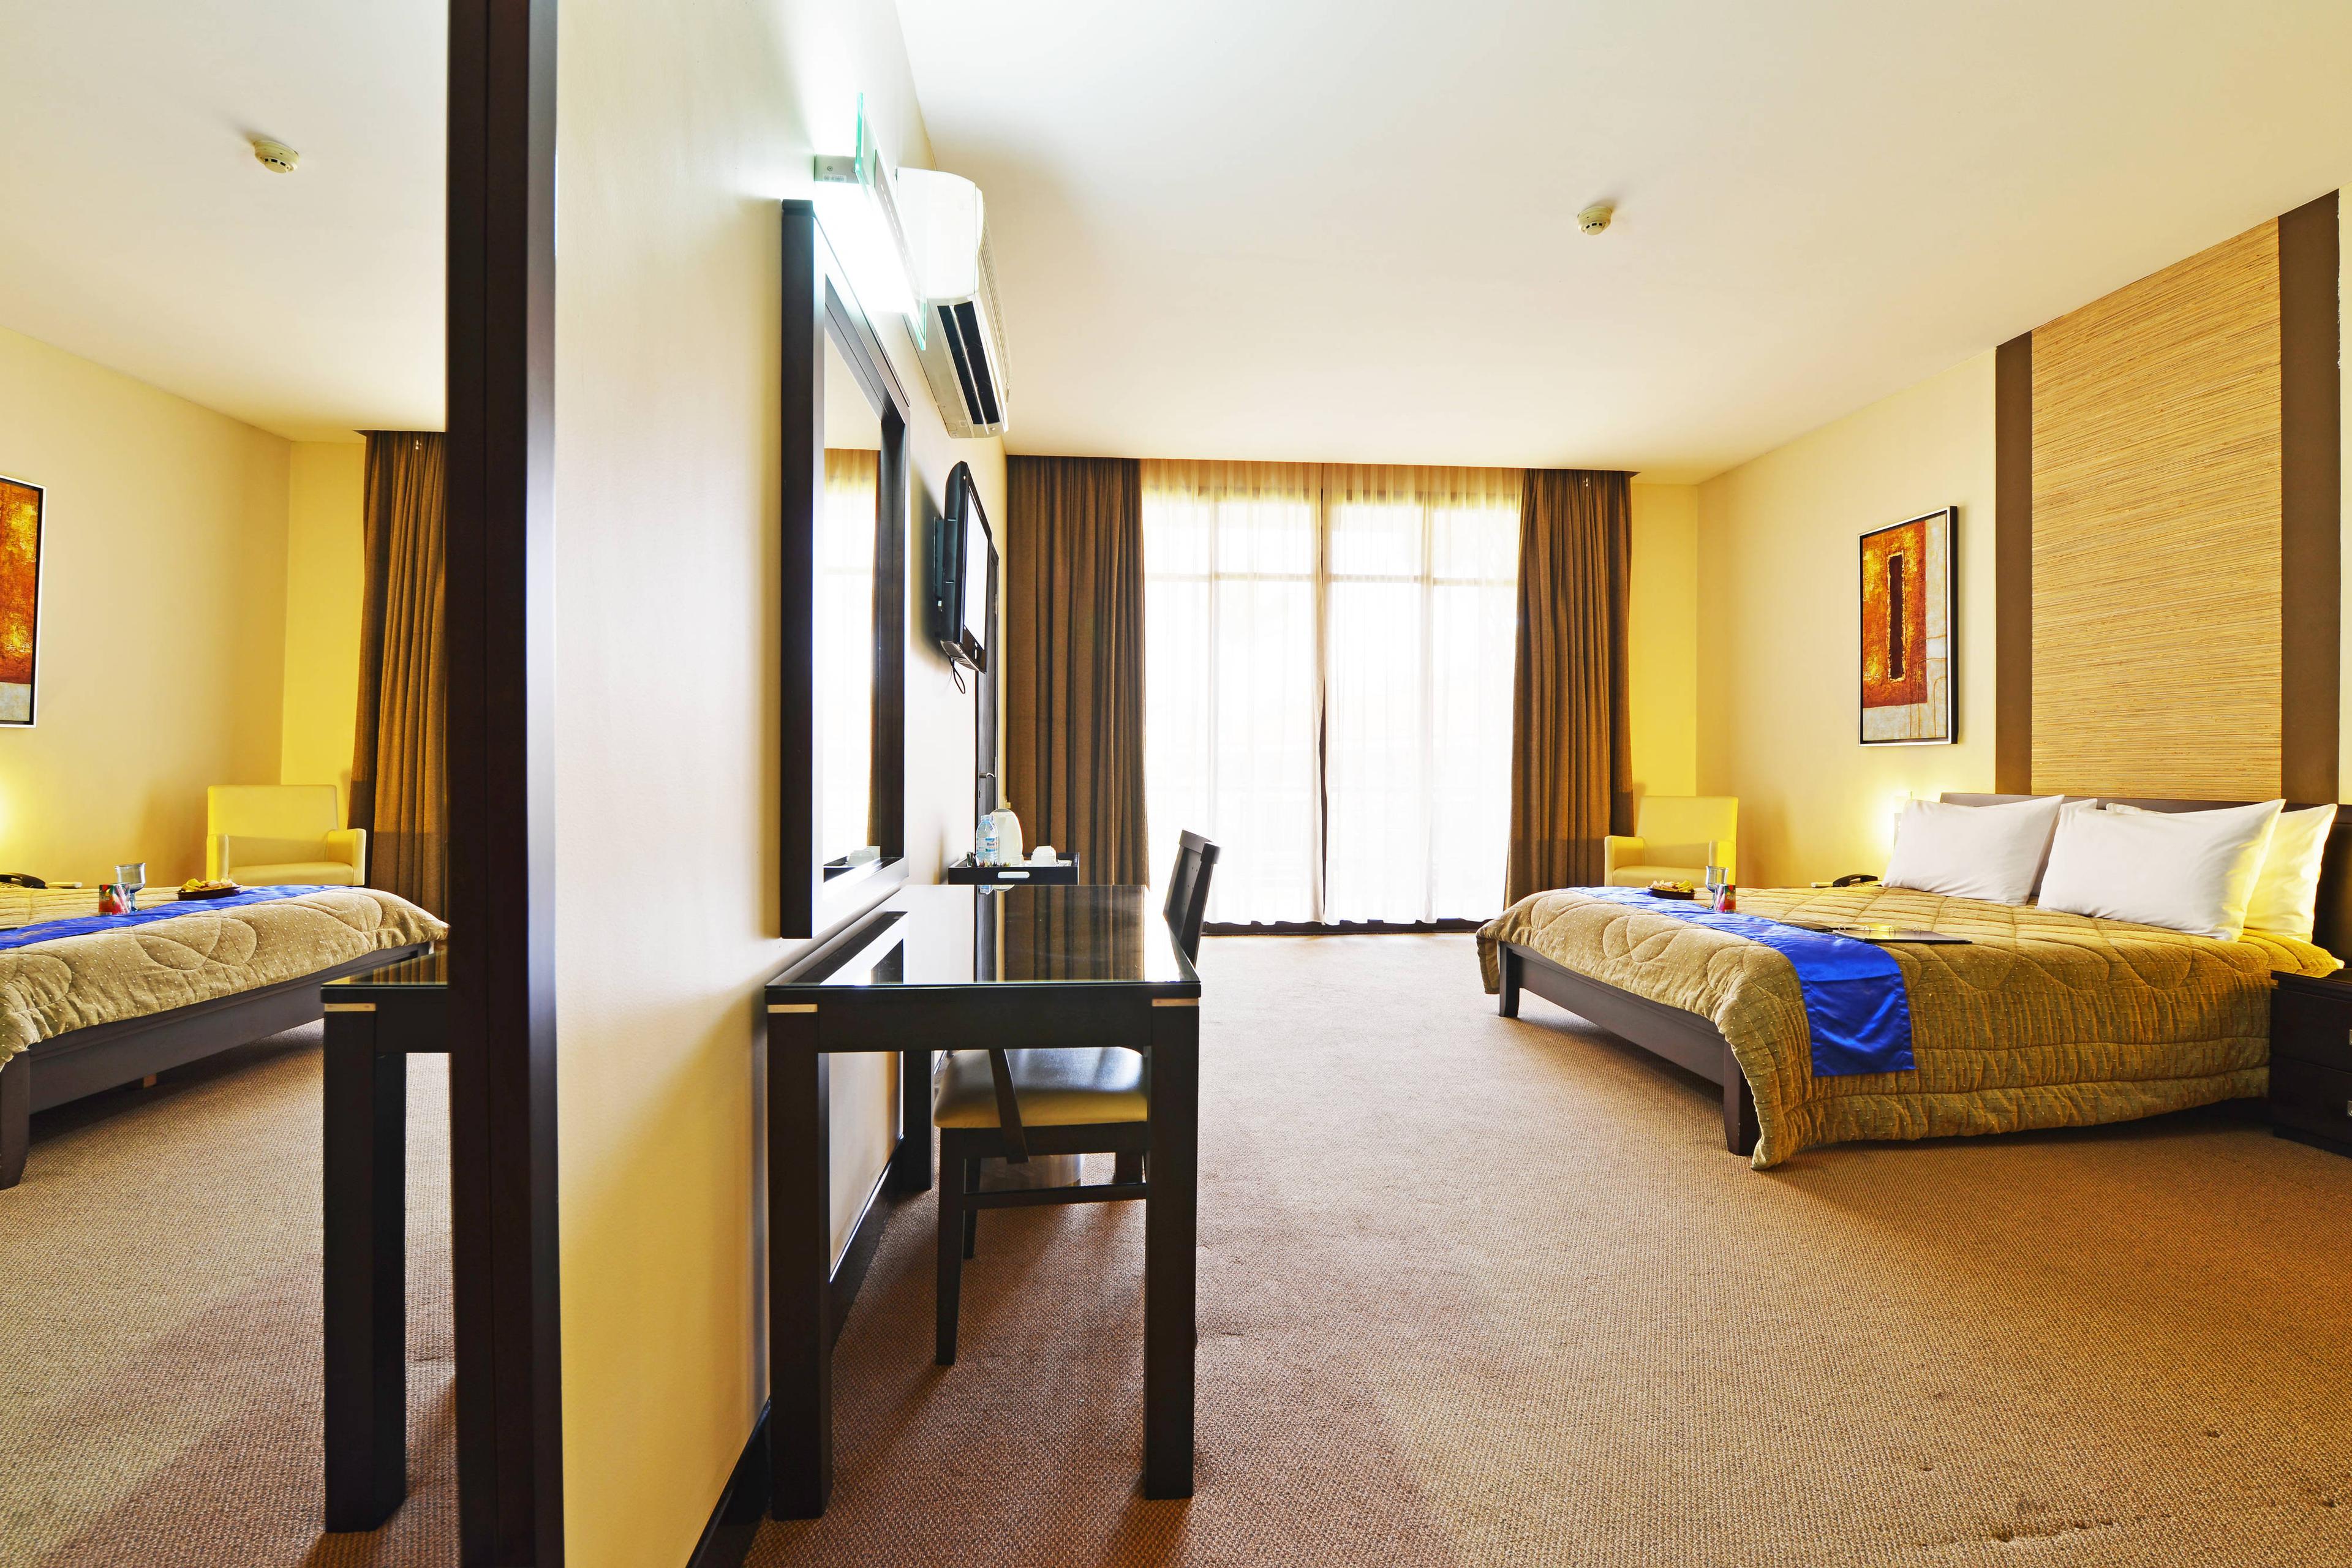 Our spacious, well-appointed rooms have en-suite bathrooms and all modern amenities. Some rooms do have balconies.